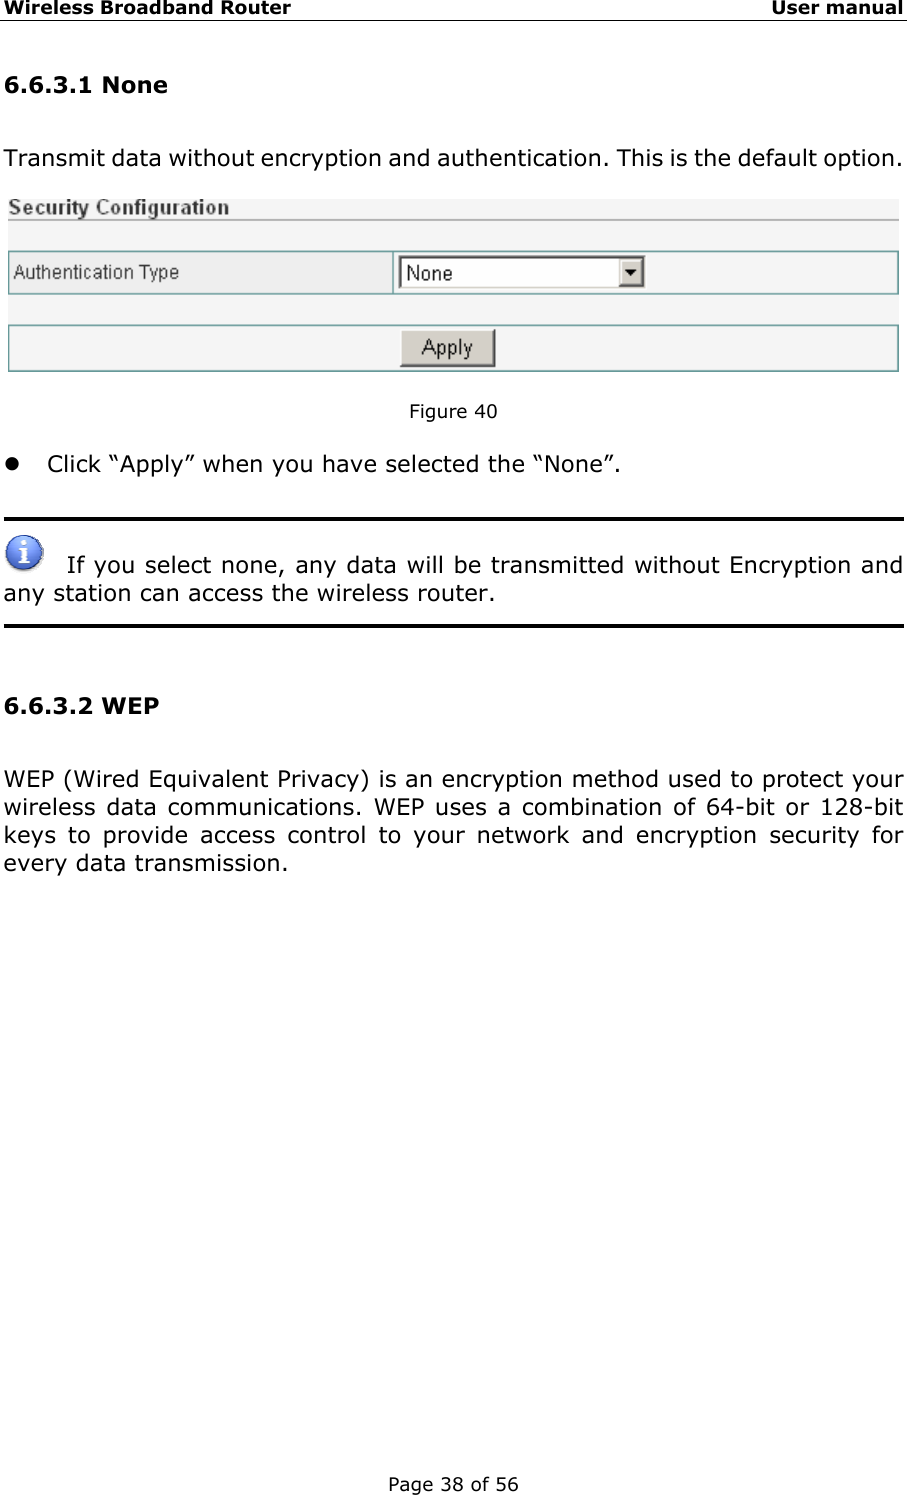 Wireless Broadband Router                                                   User manual Page 38 of 56 6.6.3.1 None Transmit data without encryption and authentication. This is the default option.    Figure 40  z Click “Apply” when you have selected the “None”.     If you select none, any data will be transmitted without Encryption and any station can access the wireless router.     6.6.3.2 WEP WEP (Wired Equivalent Privacy) is an encryption method used to protect your wireless data communications. WEP uses a combination of 64-bit or 128-bit keys to provide access control to your network and encryption security for every data transmission.    